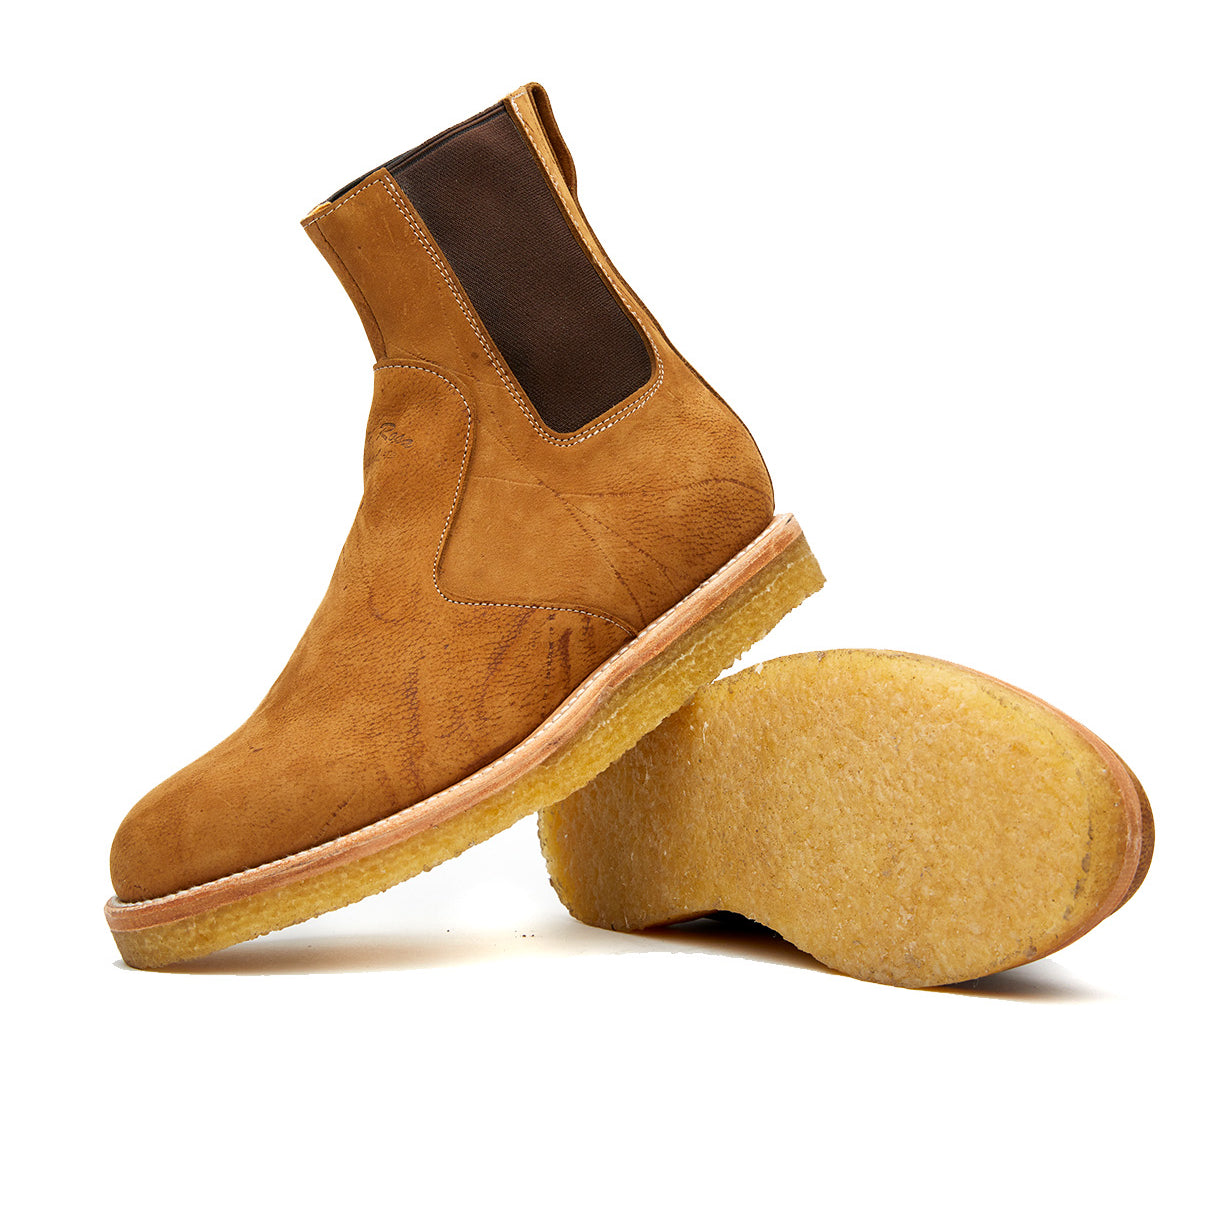 A pair of Santa Rosa Brand Stamford Boot Peanut Kudu Chelsea boots against a white background with a natural crepe outsole.